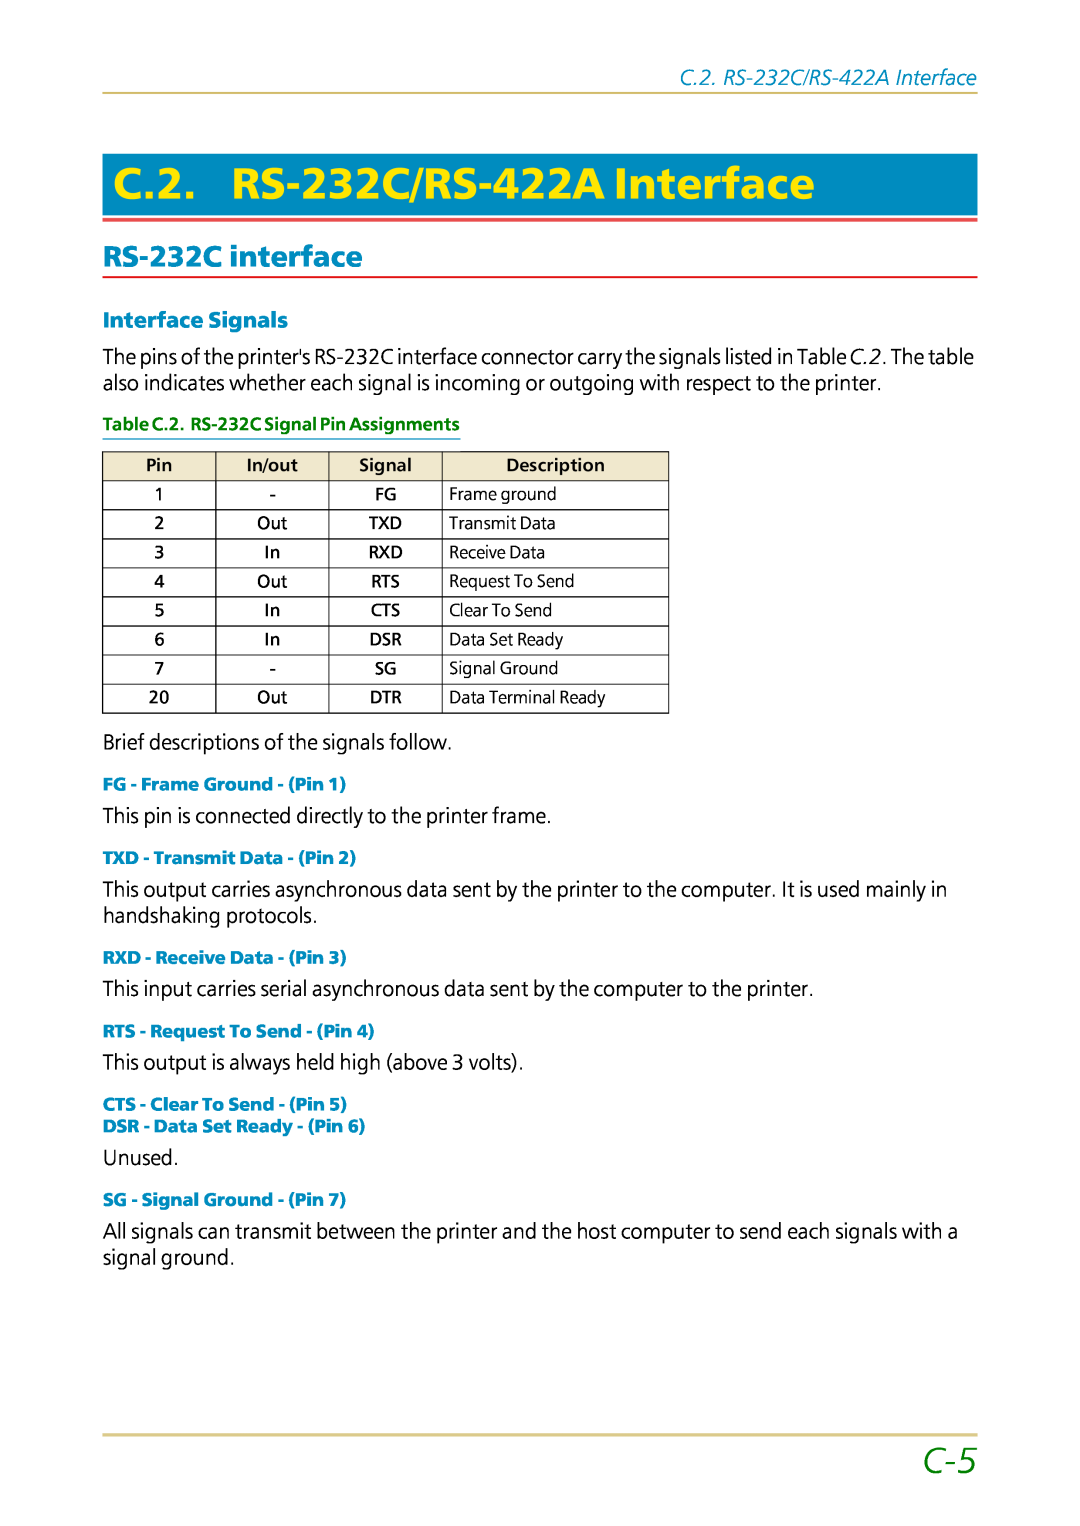 Kyocera FS-1700 user manual C.2. RS-232C/RS-422AInterface, RS-232Cinterface, Interface Signals 